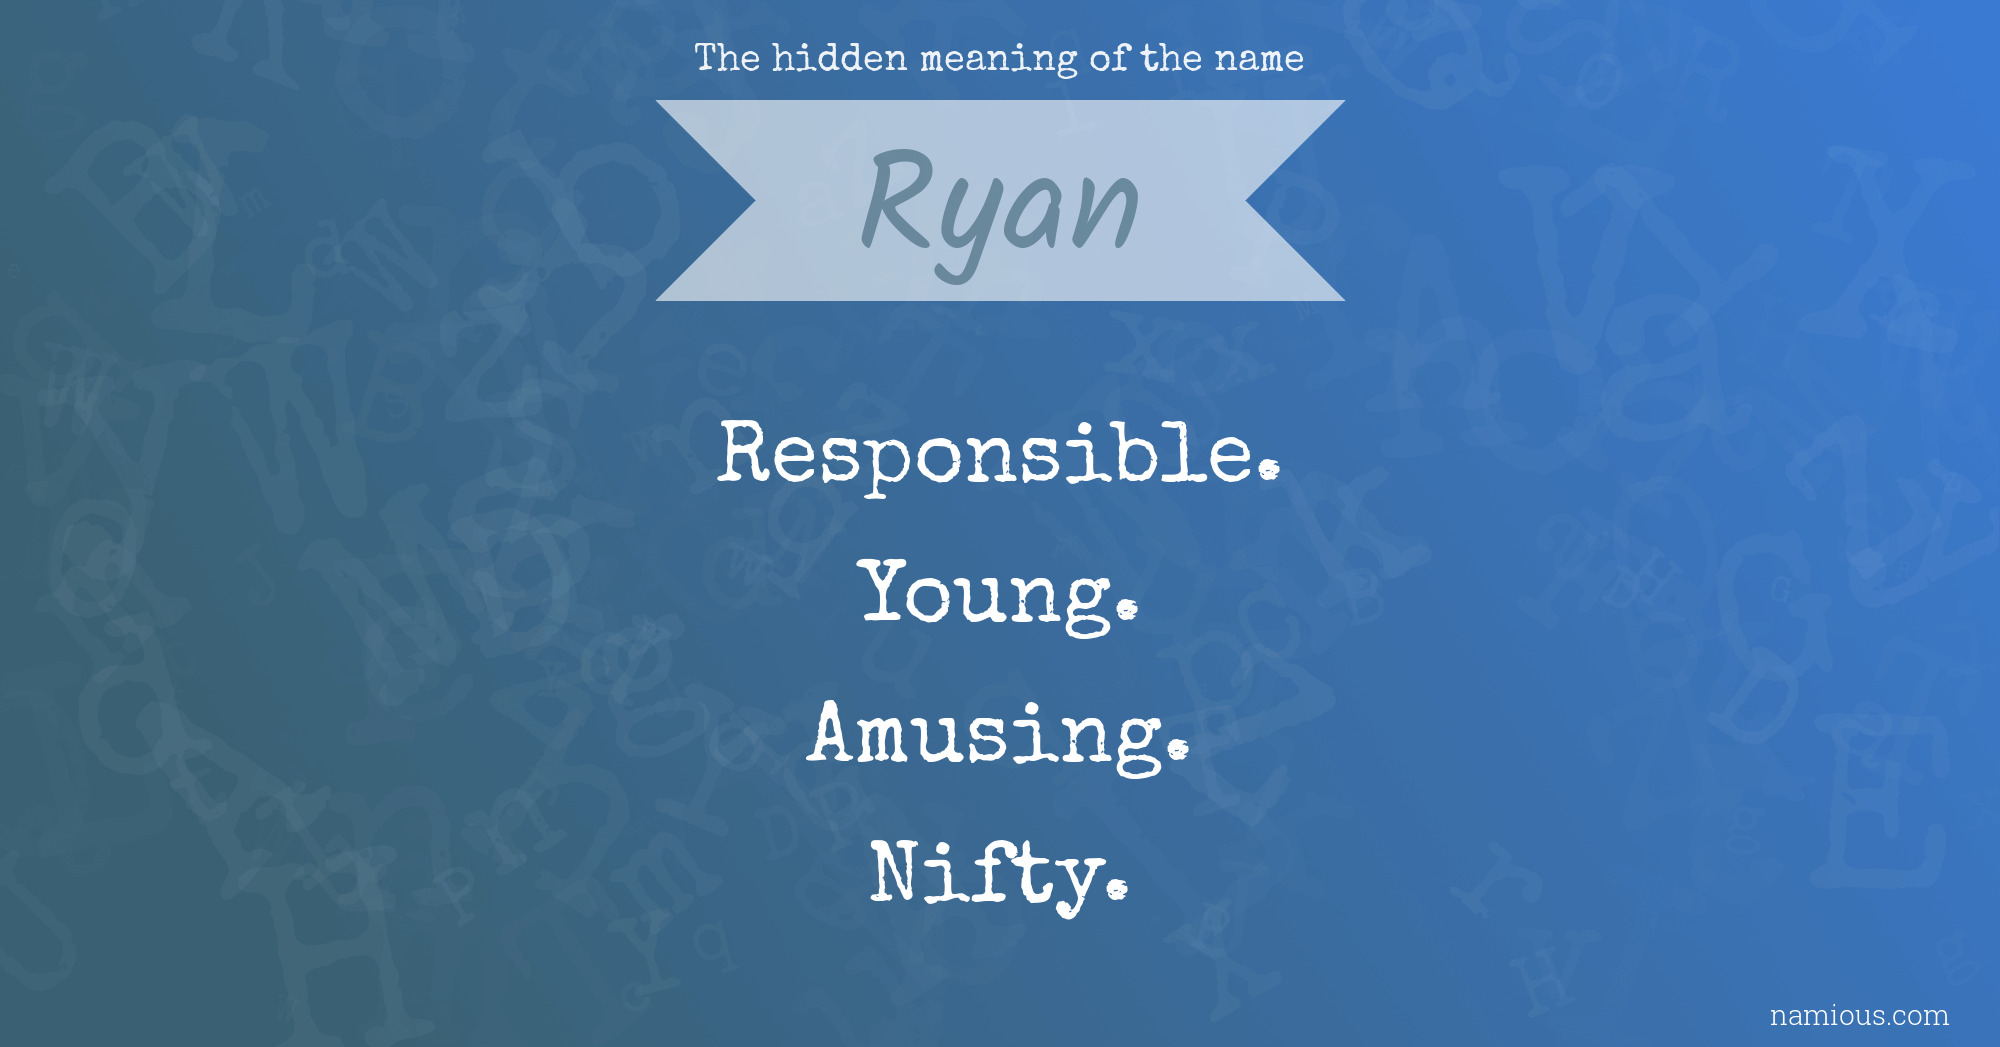 The hidden meaning of the name Ryan